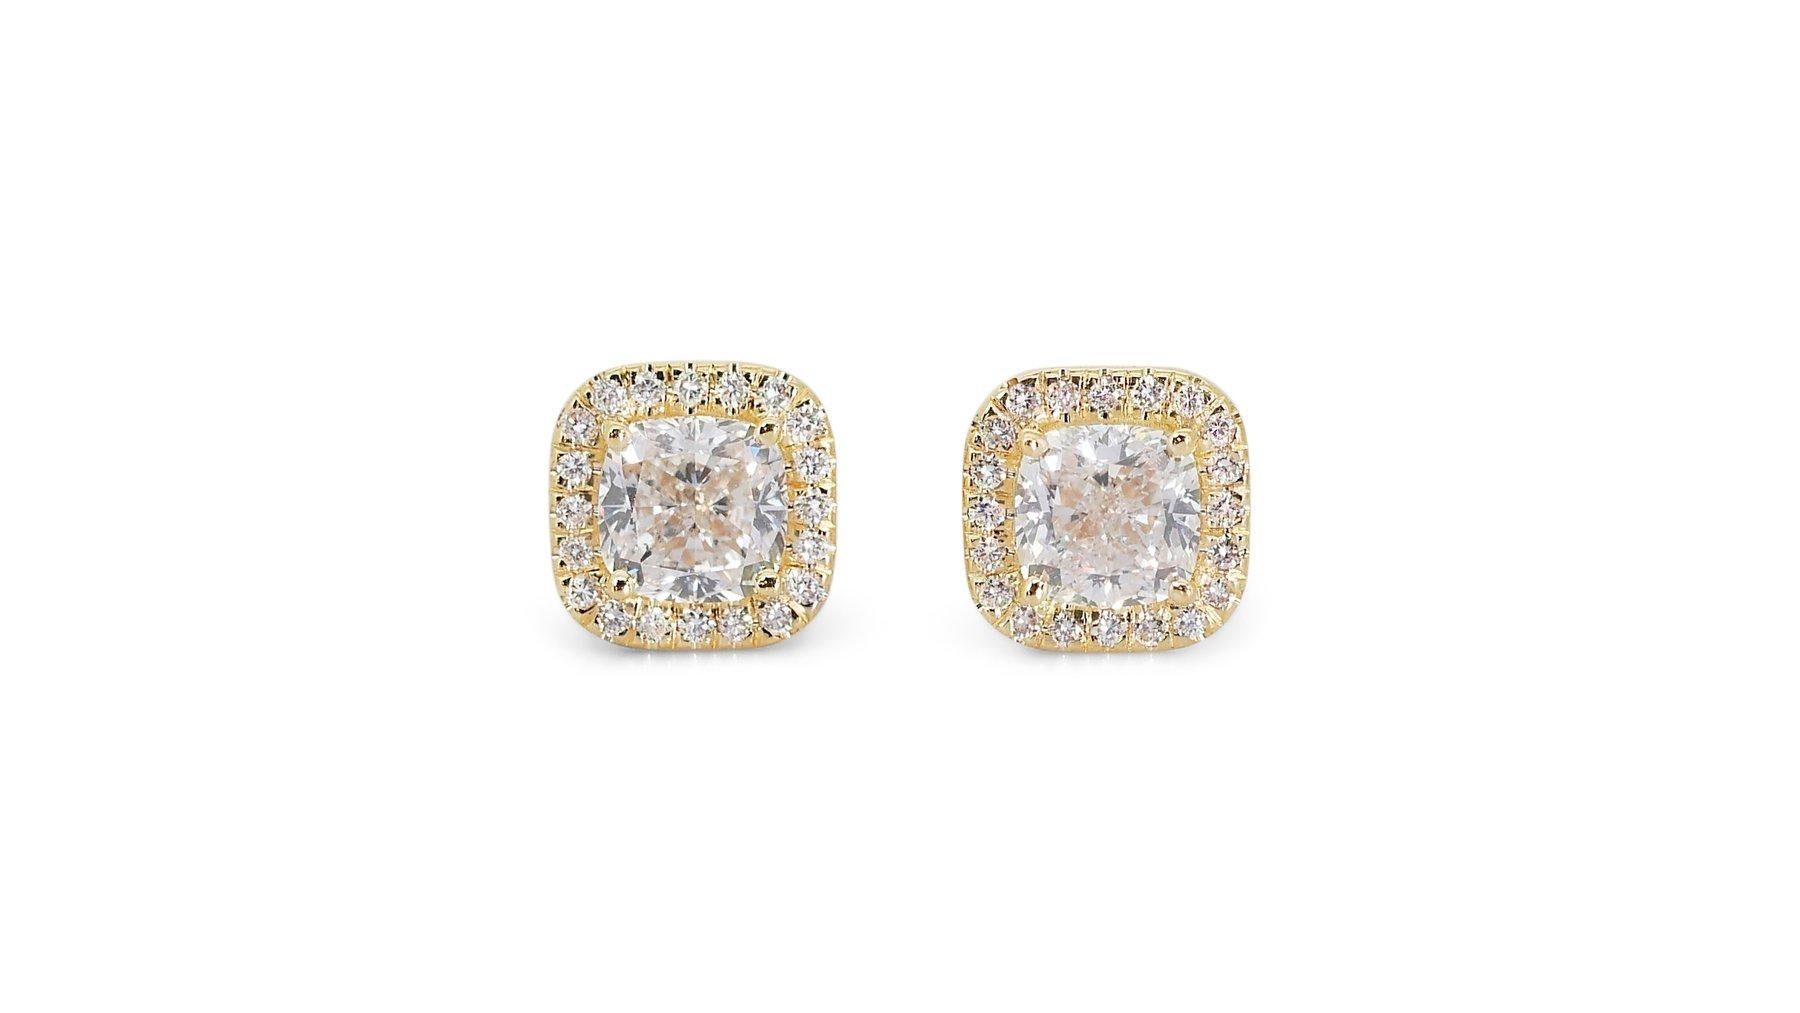 A mesmerizing pair of earrings featuring 3 carat cushion shape natural diamonds, certified by IGI (certificate number 10J2181823). The diamonds have a color of G-H and clarity of SI1-SI2, with a cut grade of VG. The earrings are further adorned with